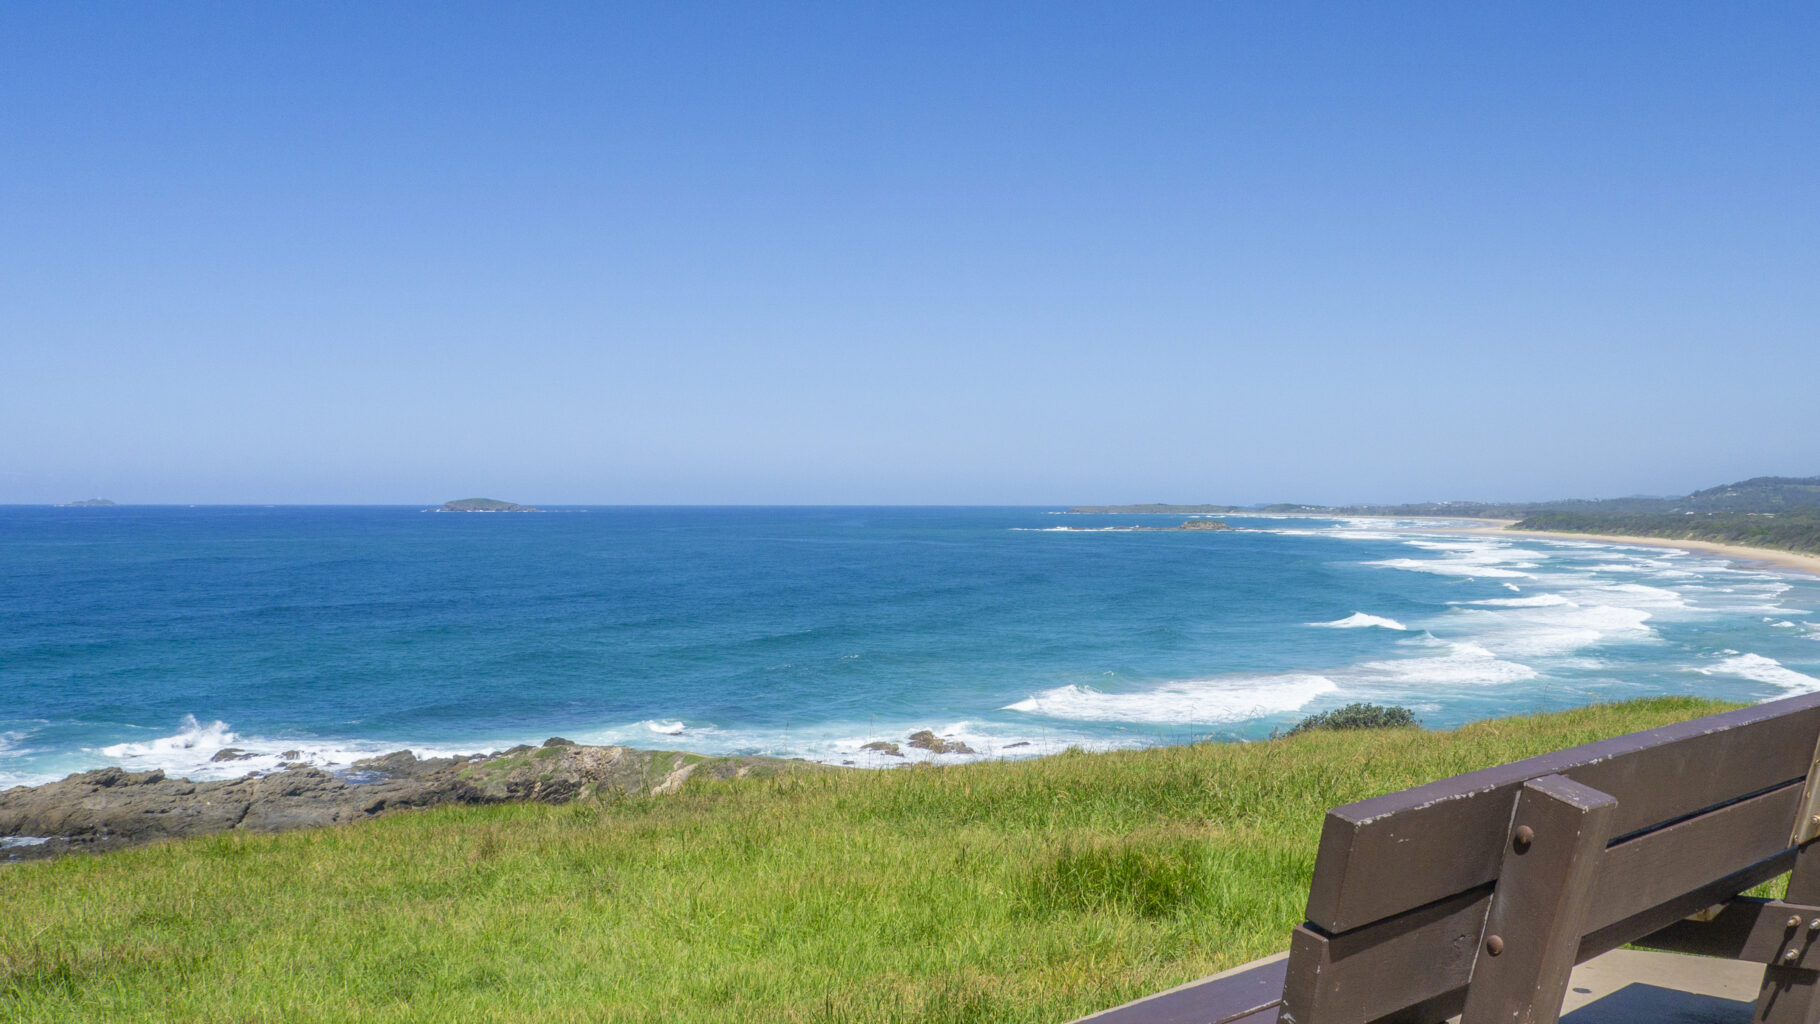 Woolgoolga Headland Is Great For Witnessing Migrating Humpback Whales